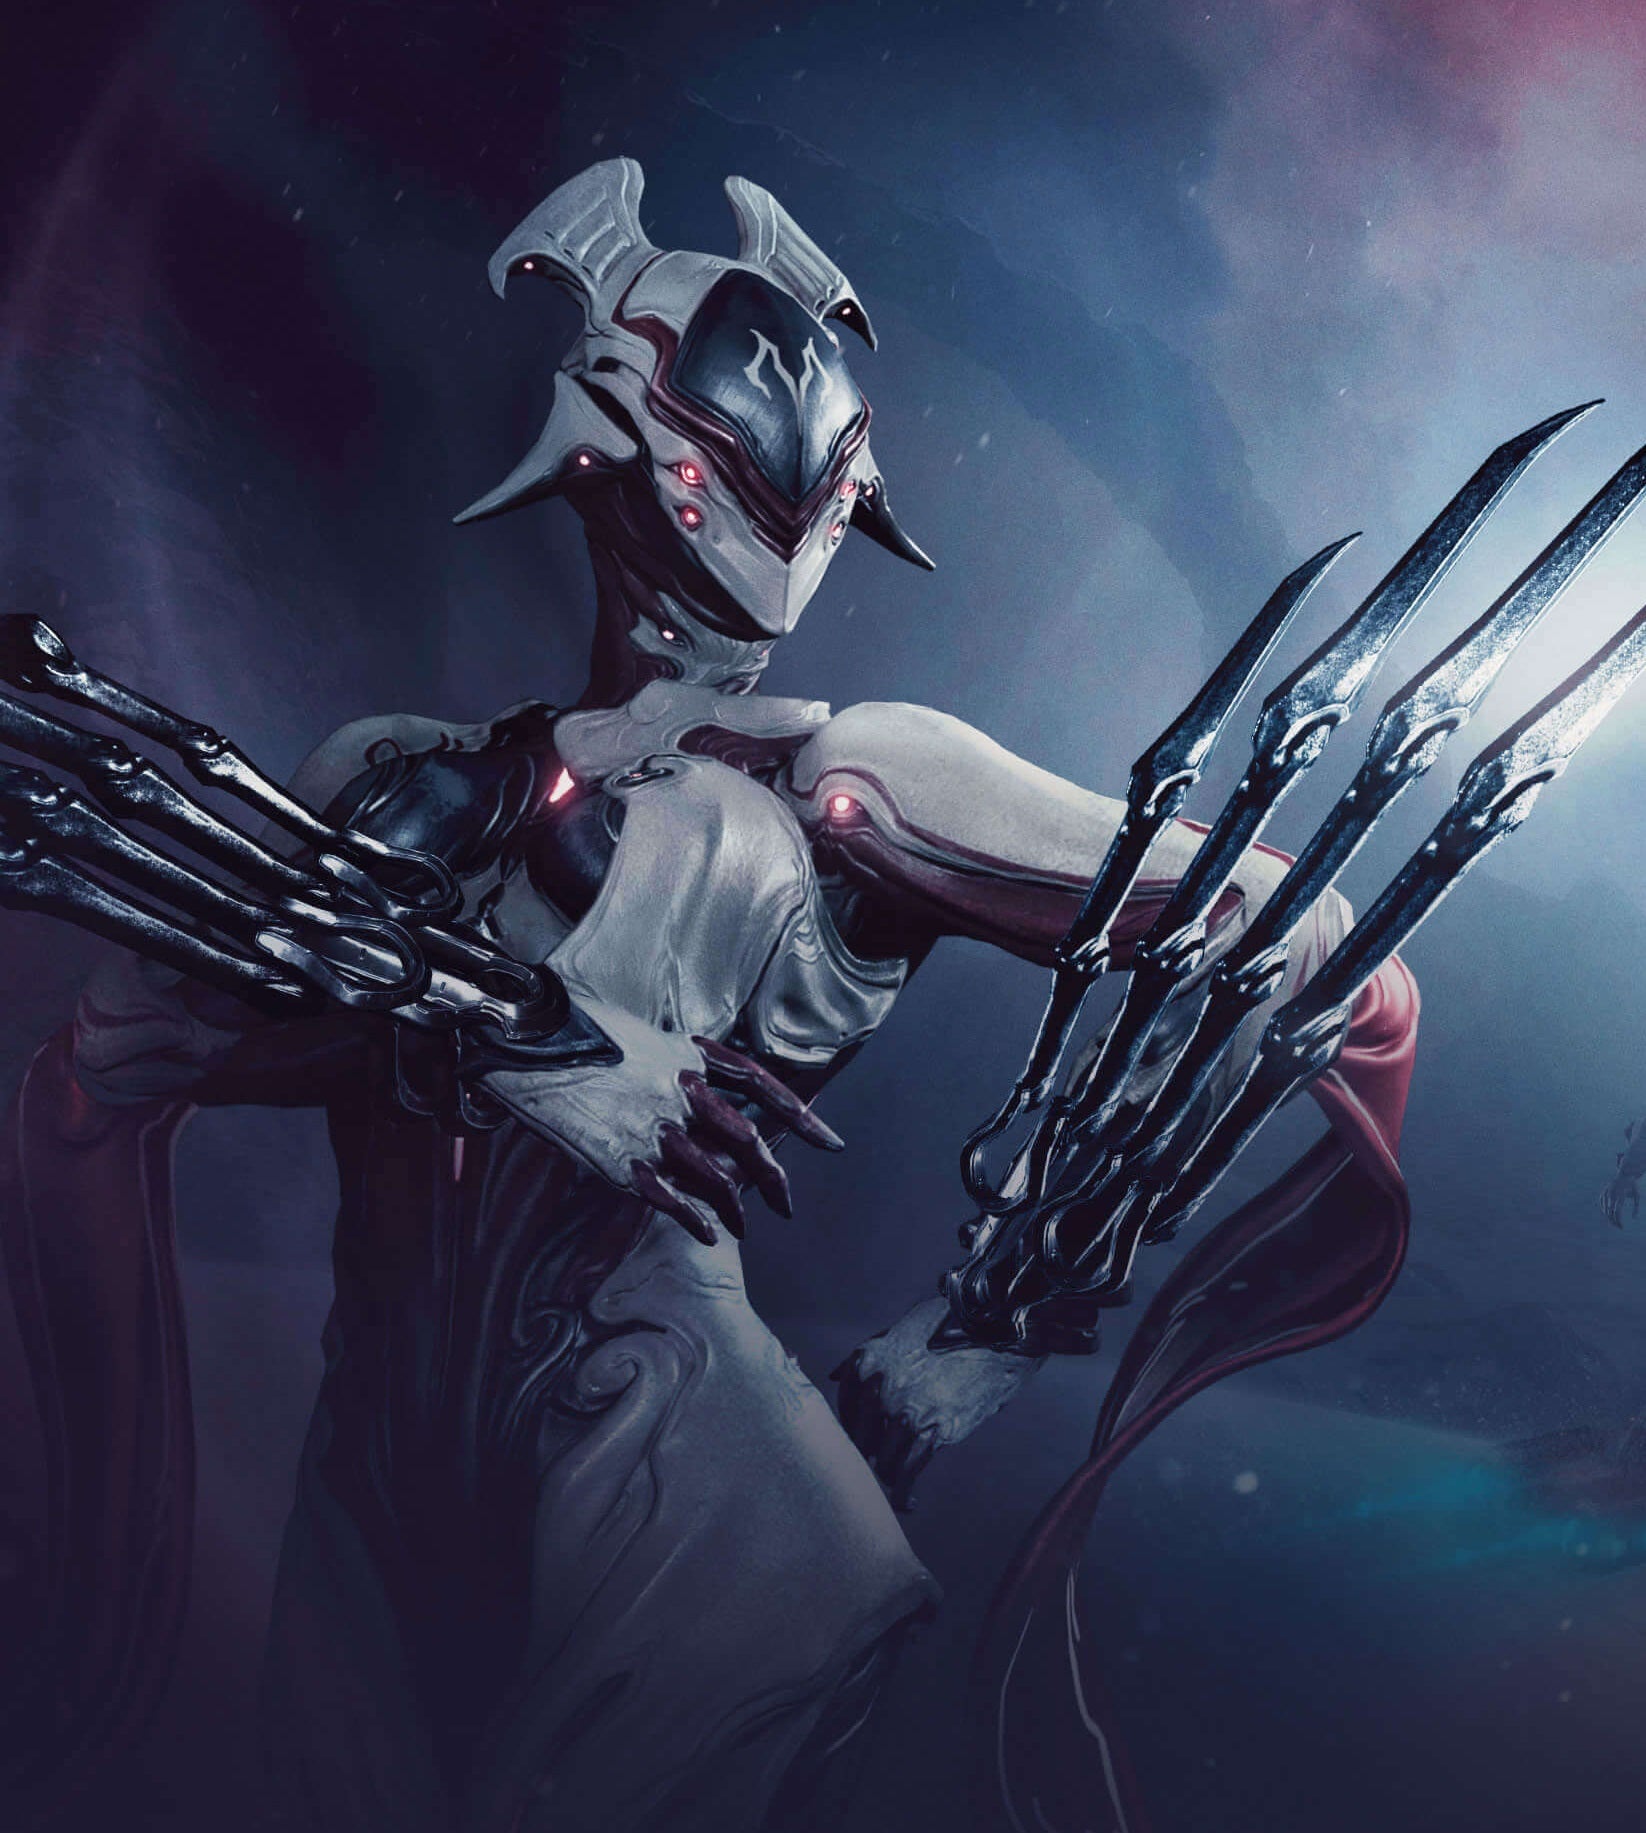 Image for Warframe's Fortuna update The Profit Taker launches on PS4 and Xbox One today